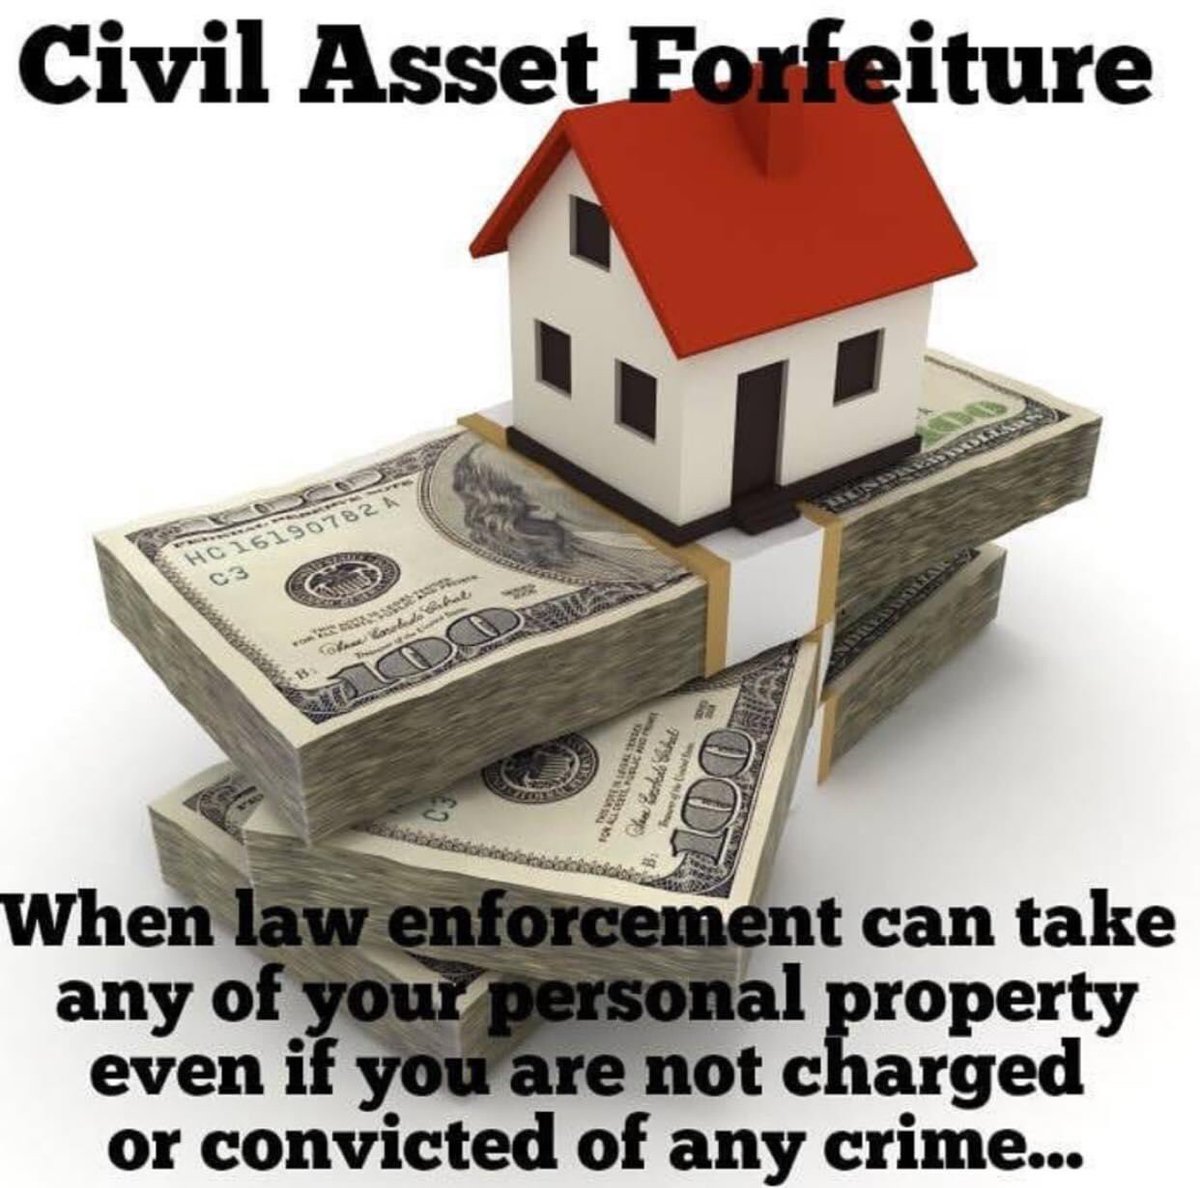 Our government can legally do this. It’s called Civil Asset Forfeiture, and it’s basically legalized theft.

#SharpeWay #LarrySharpe #libertarian #CivilAssetForfeiture #liberty #freedom #theft #government